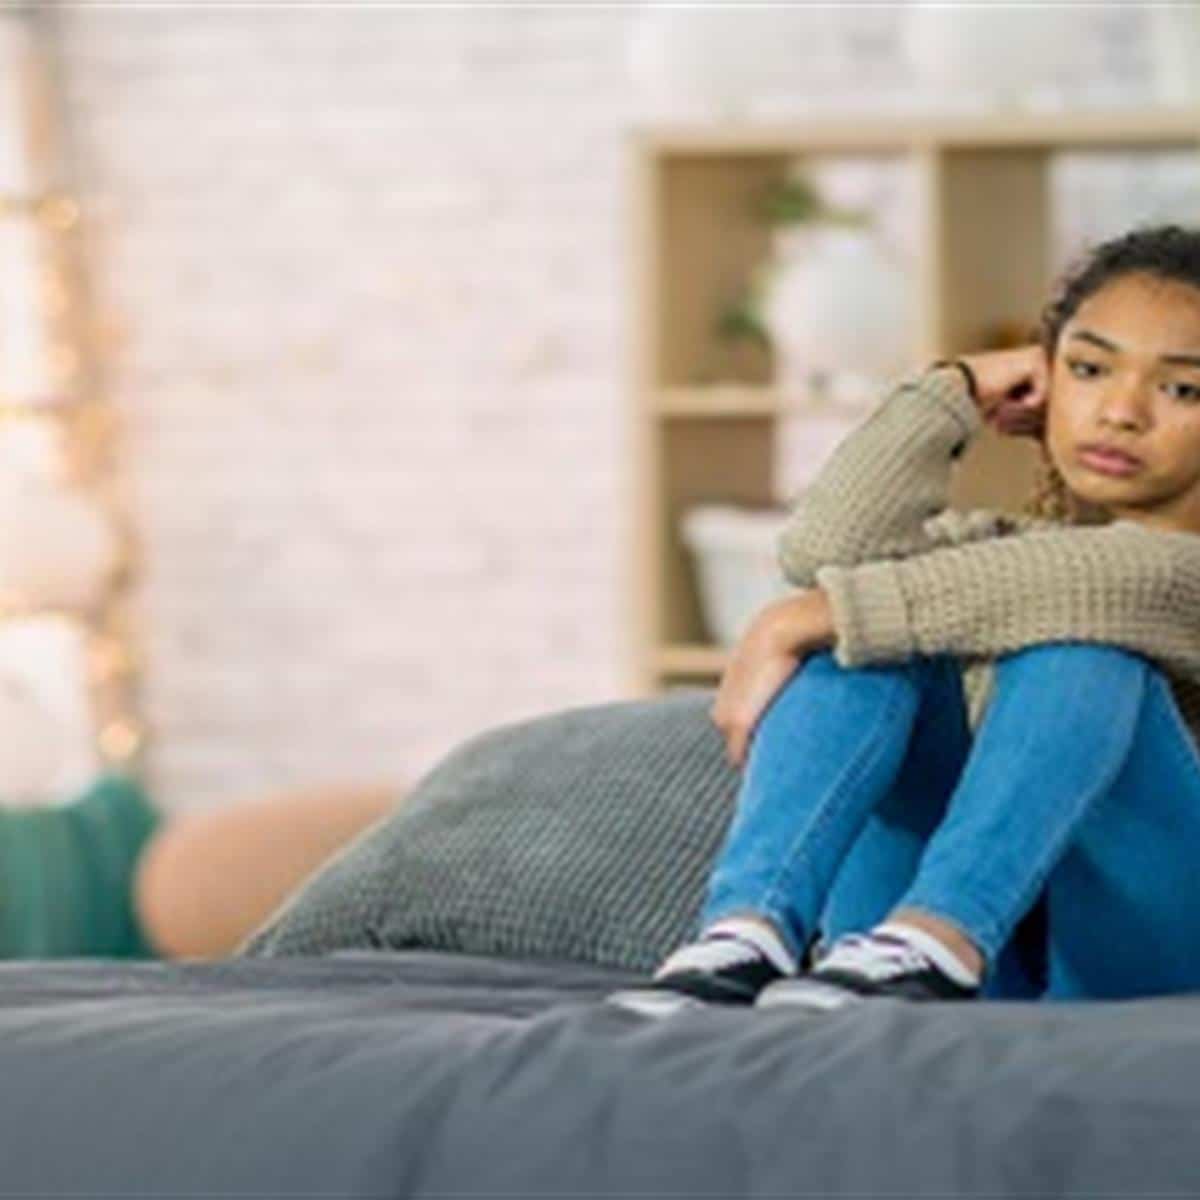 Adolescent Depression: What Parents Can Do To Help